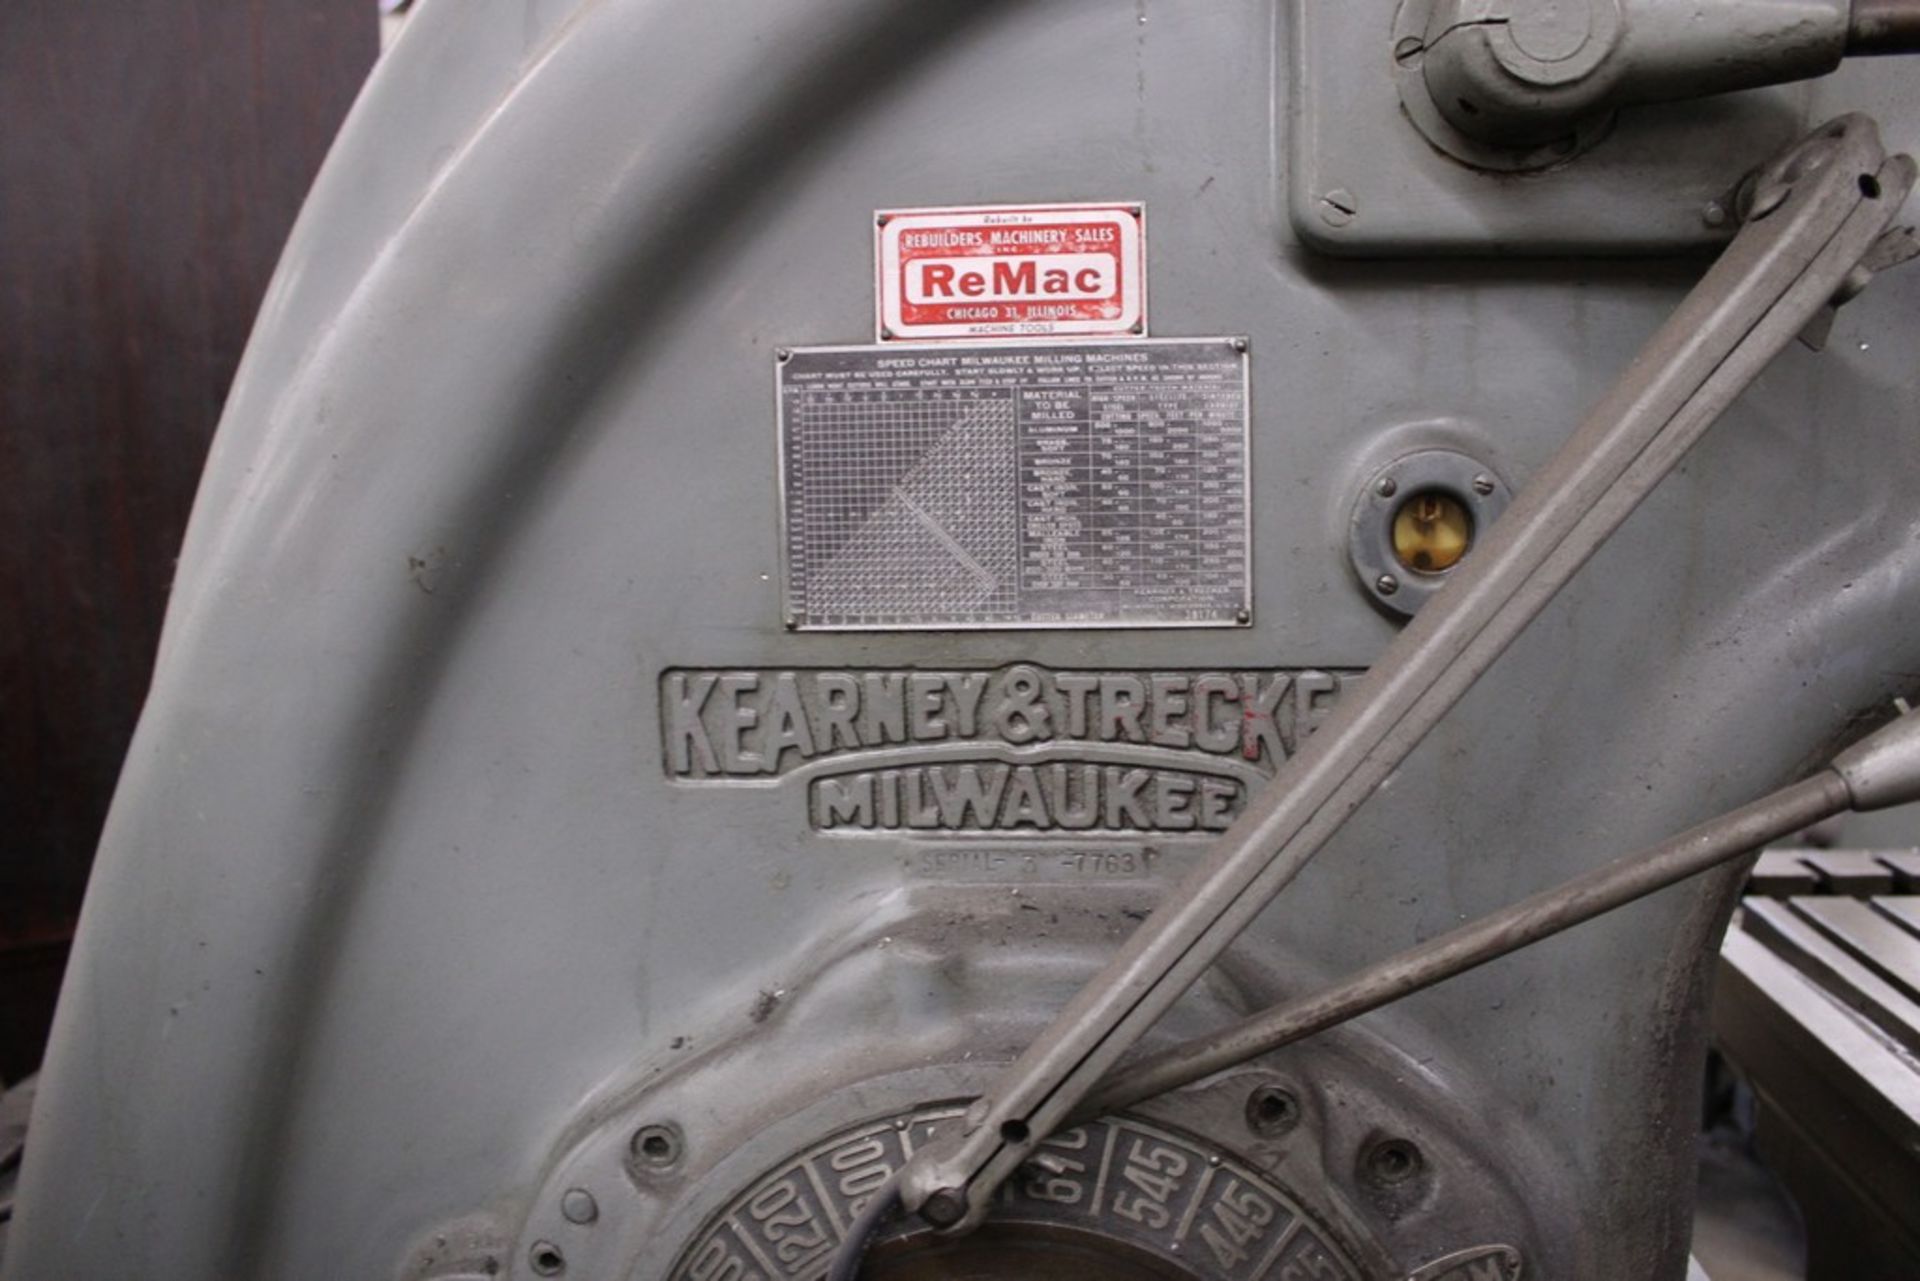 KEARNEY & TRECKER MODEL 10HP-2CK VERTICAL MILL, S/N 3-7763, 1500 RPM SPINDLE, 13-1/2’X58” TABLE - Image 5 of 8